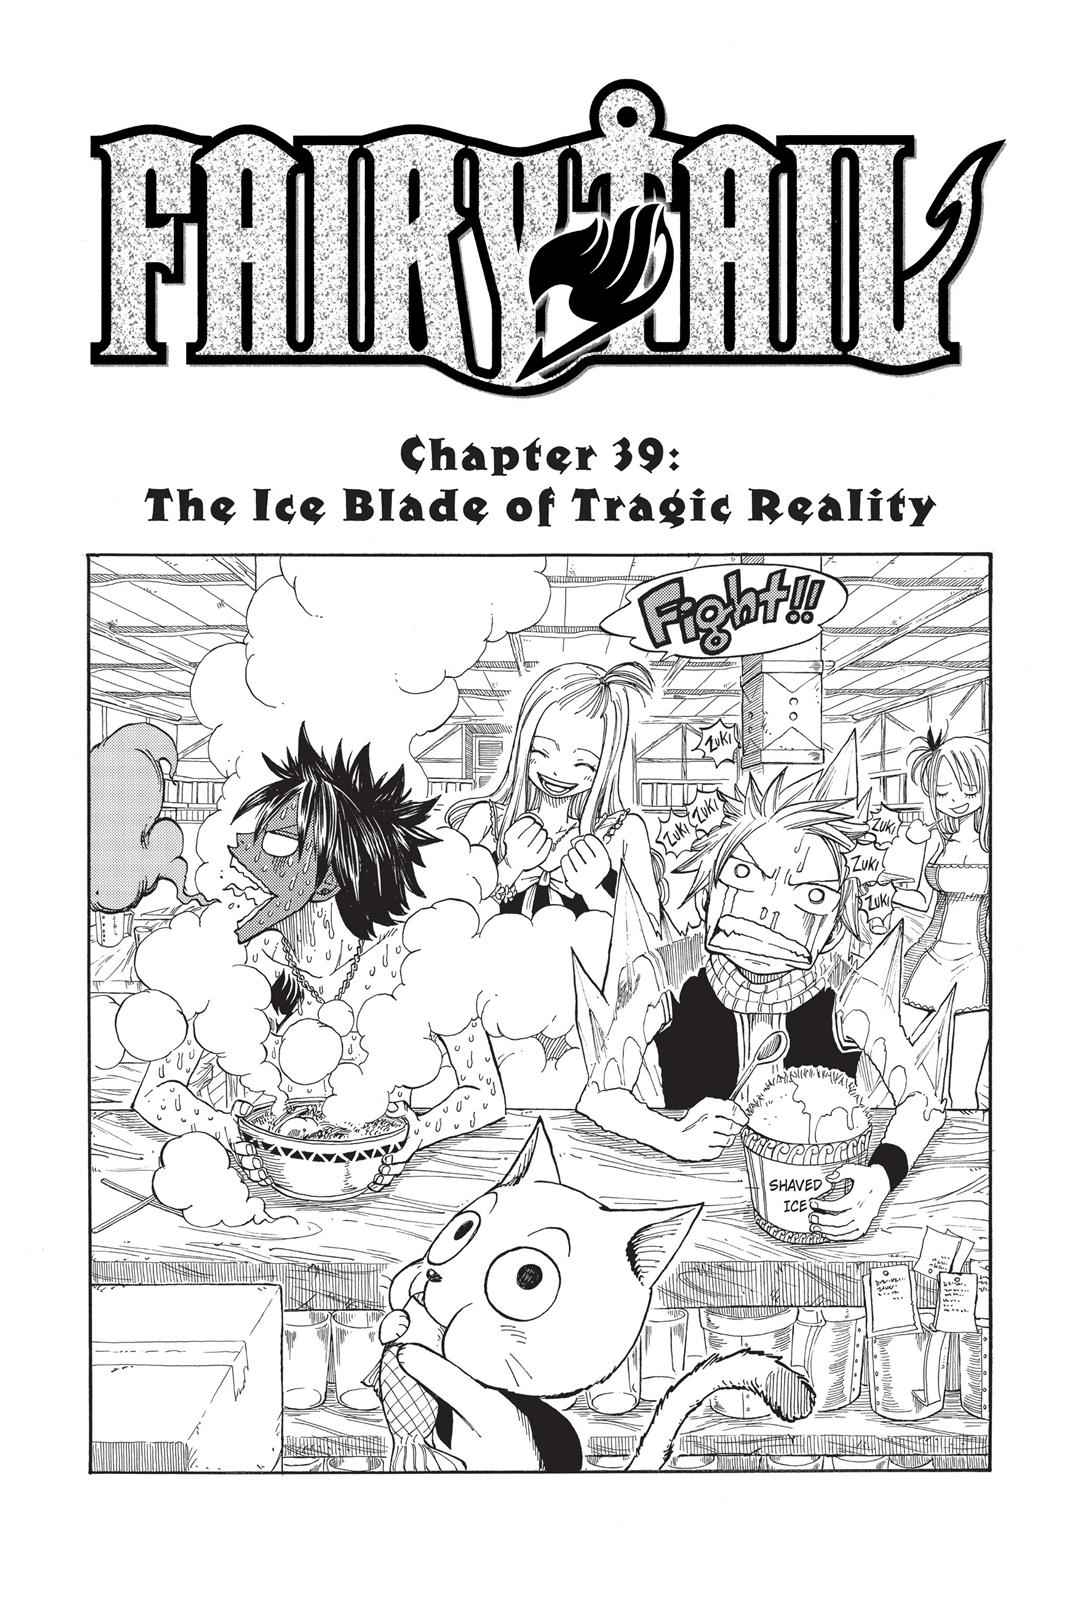 Lucy Heartfilia in Fairy Tail Manga Volume and Chapter Covers